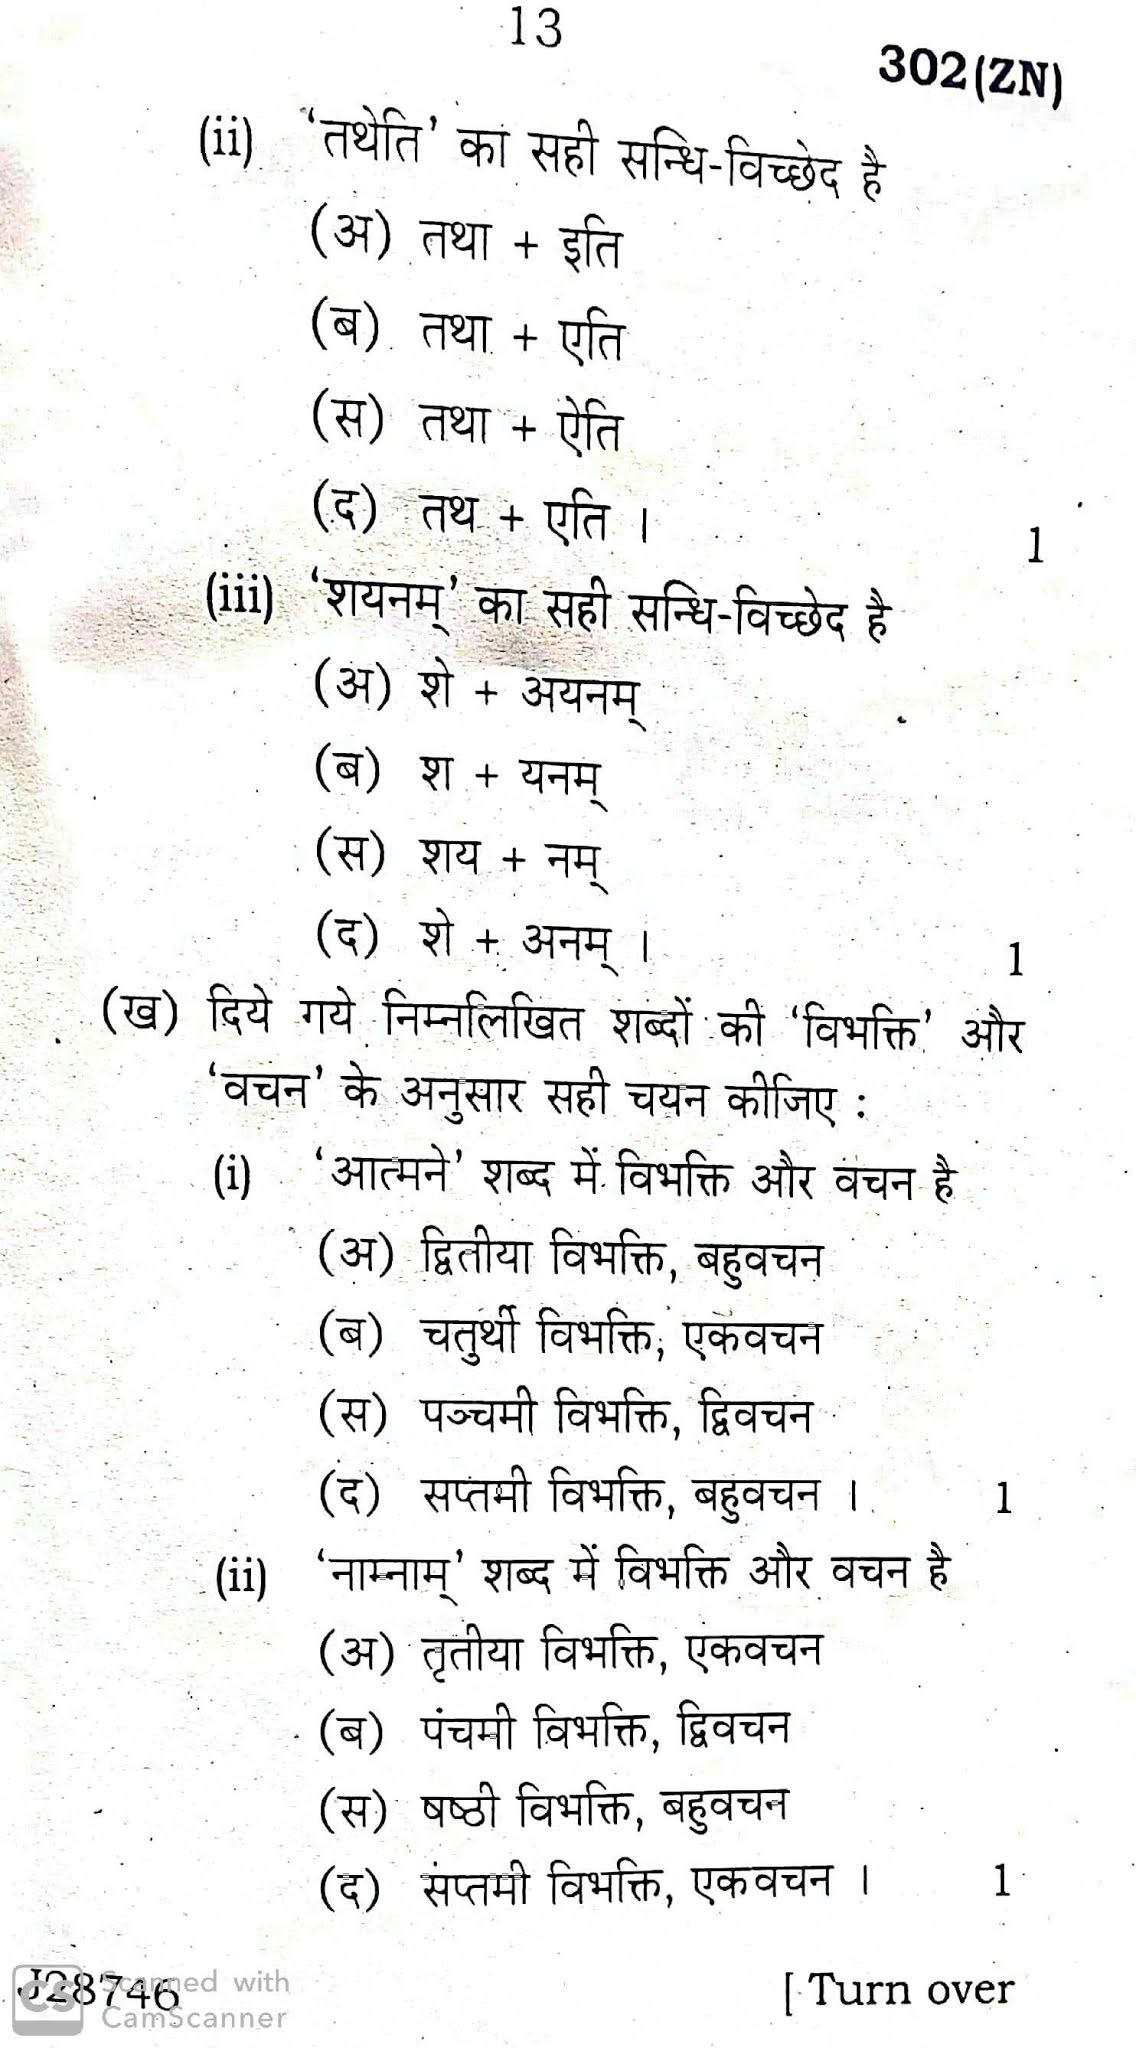 Hindi, UP Board Question Paper for 12th (Intermediate) 2020 examination